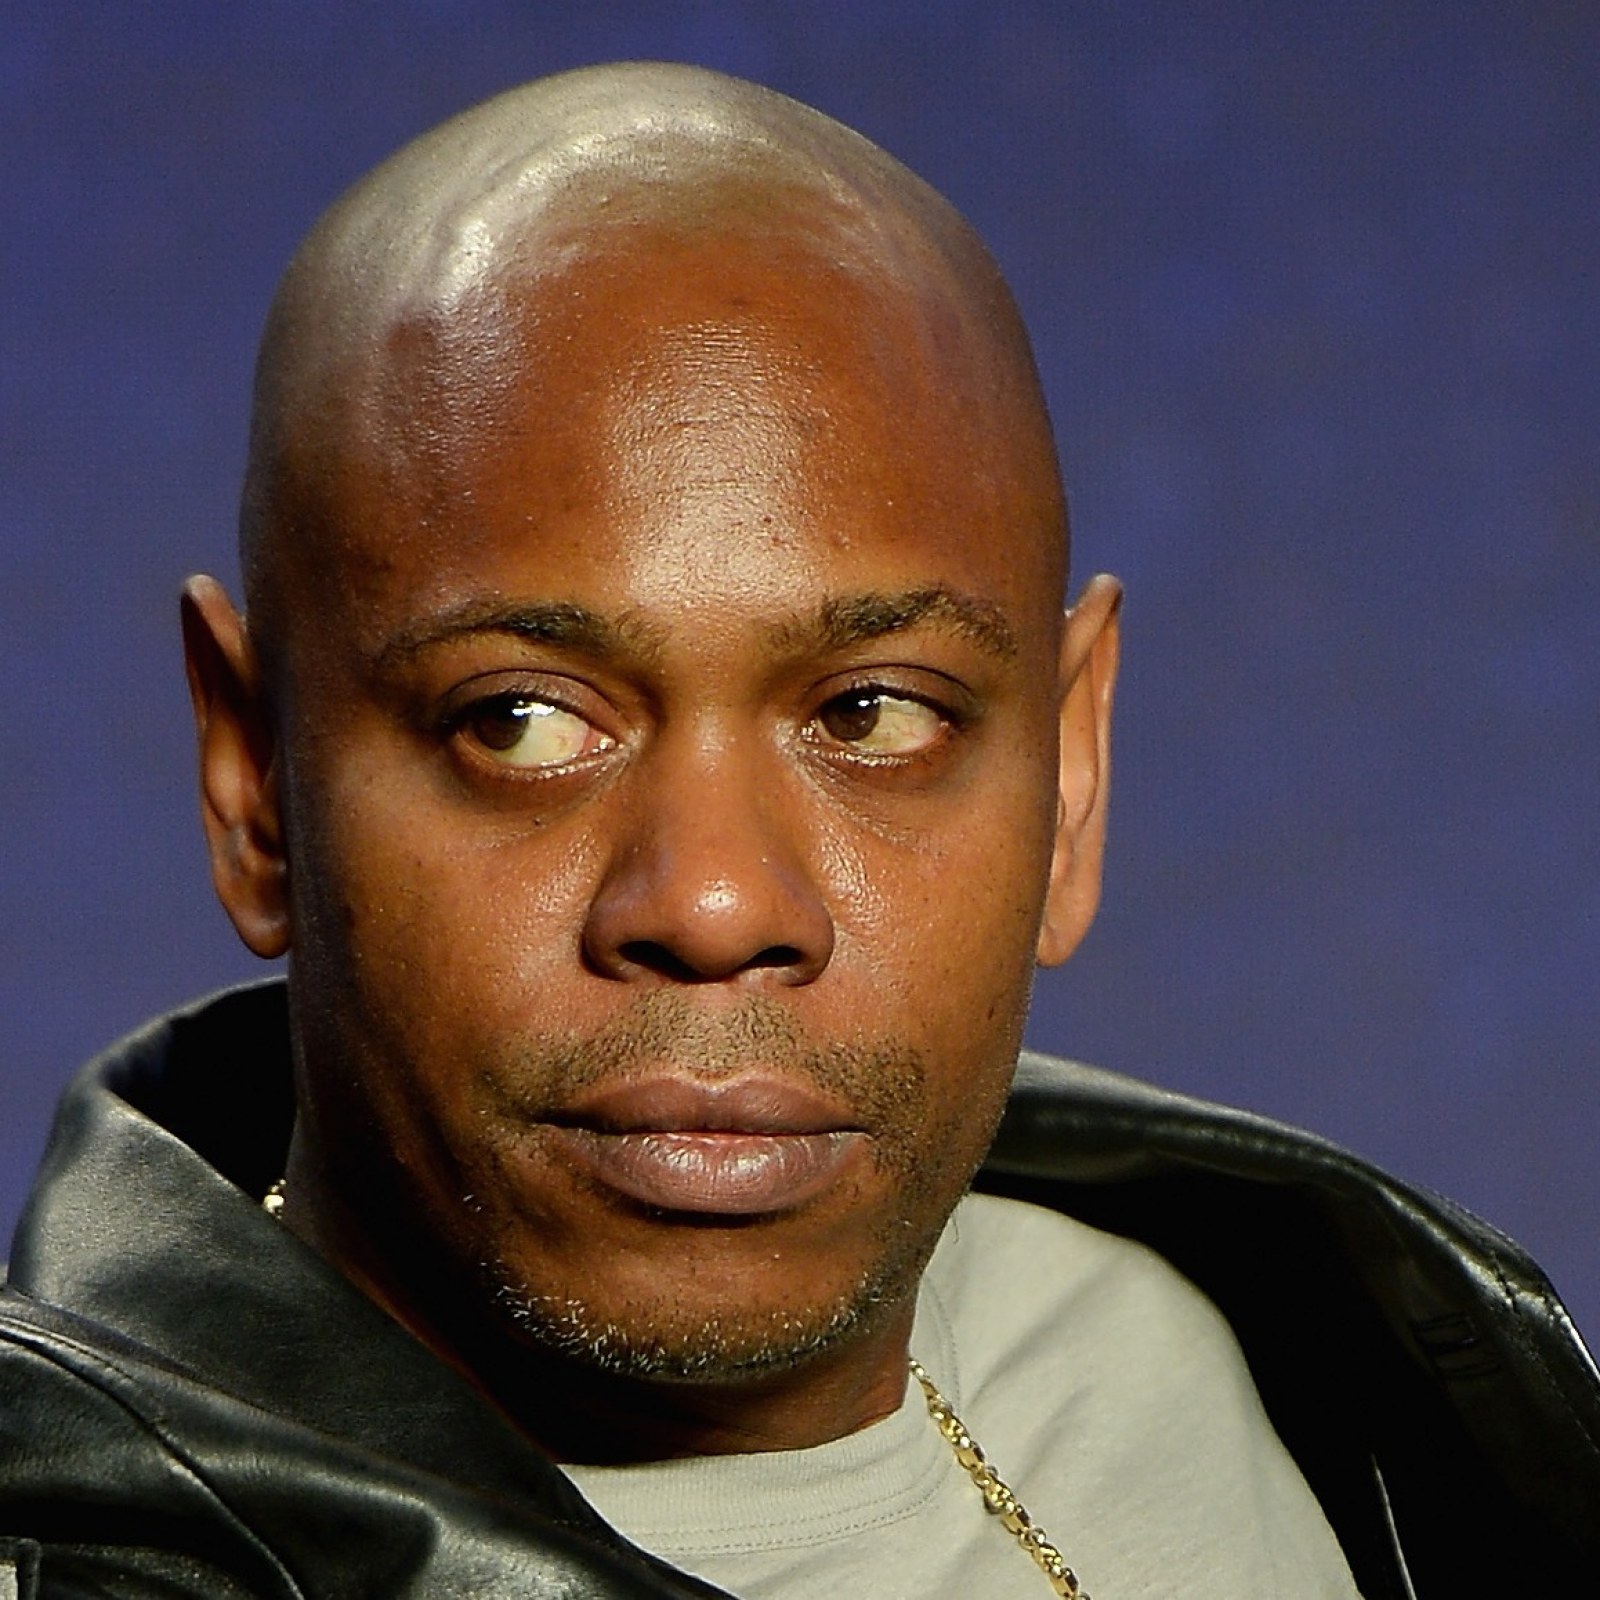 Isaiah Lee Identified as Dave Chappelle Attacker